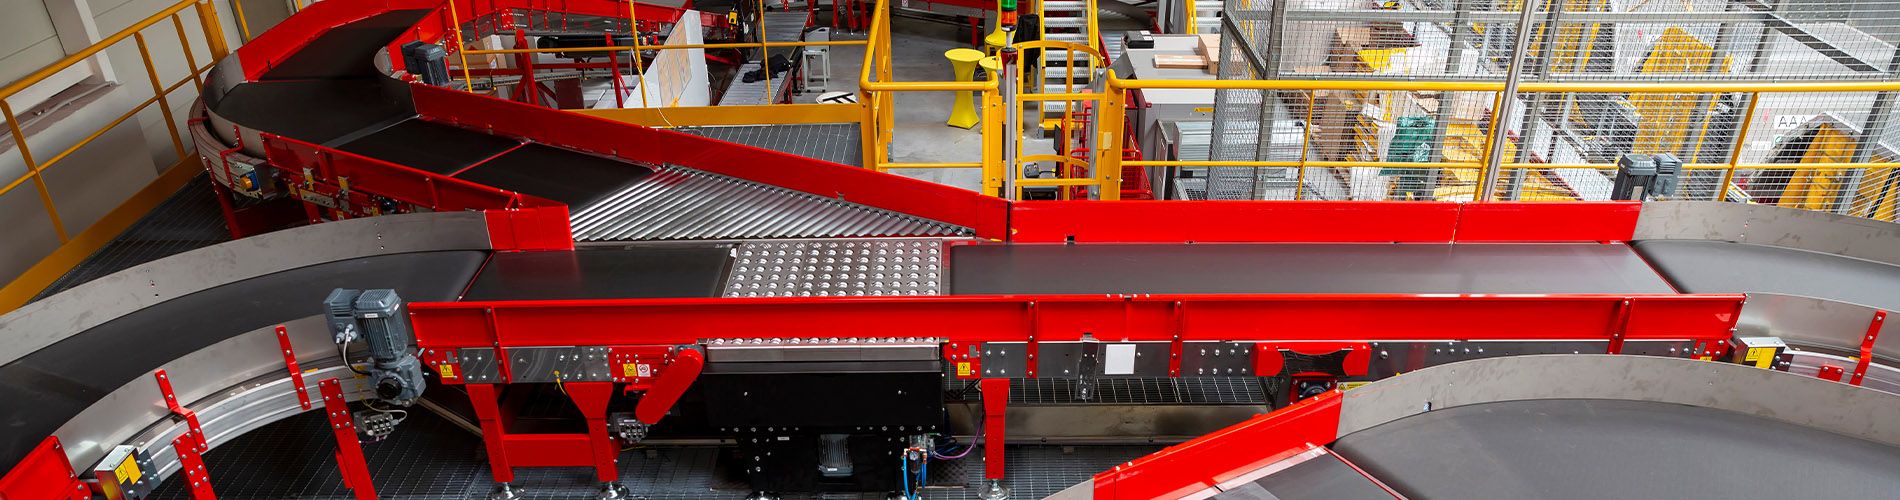 An image of a conveyor belt inside of a manufacturing facility.